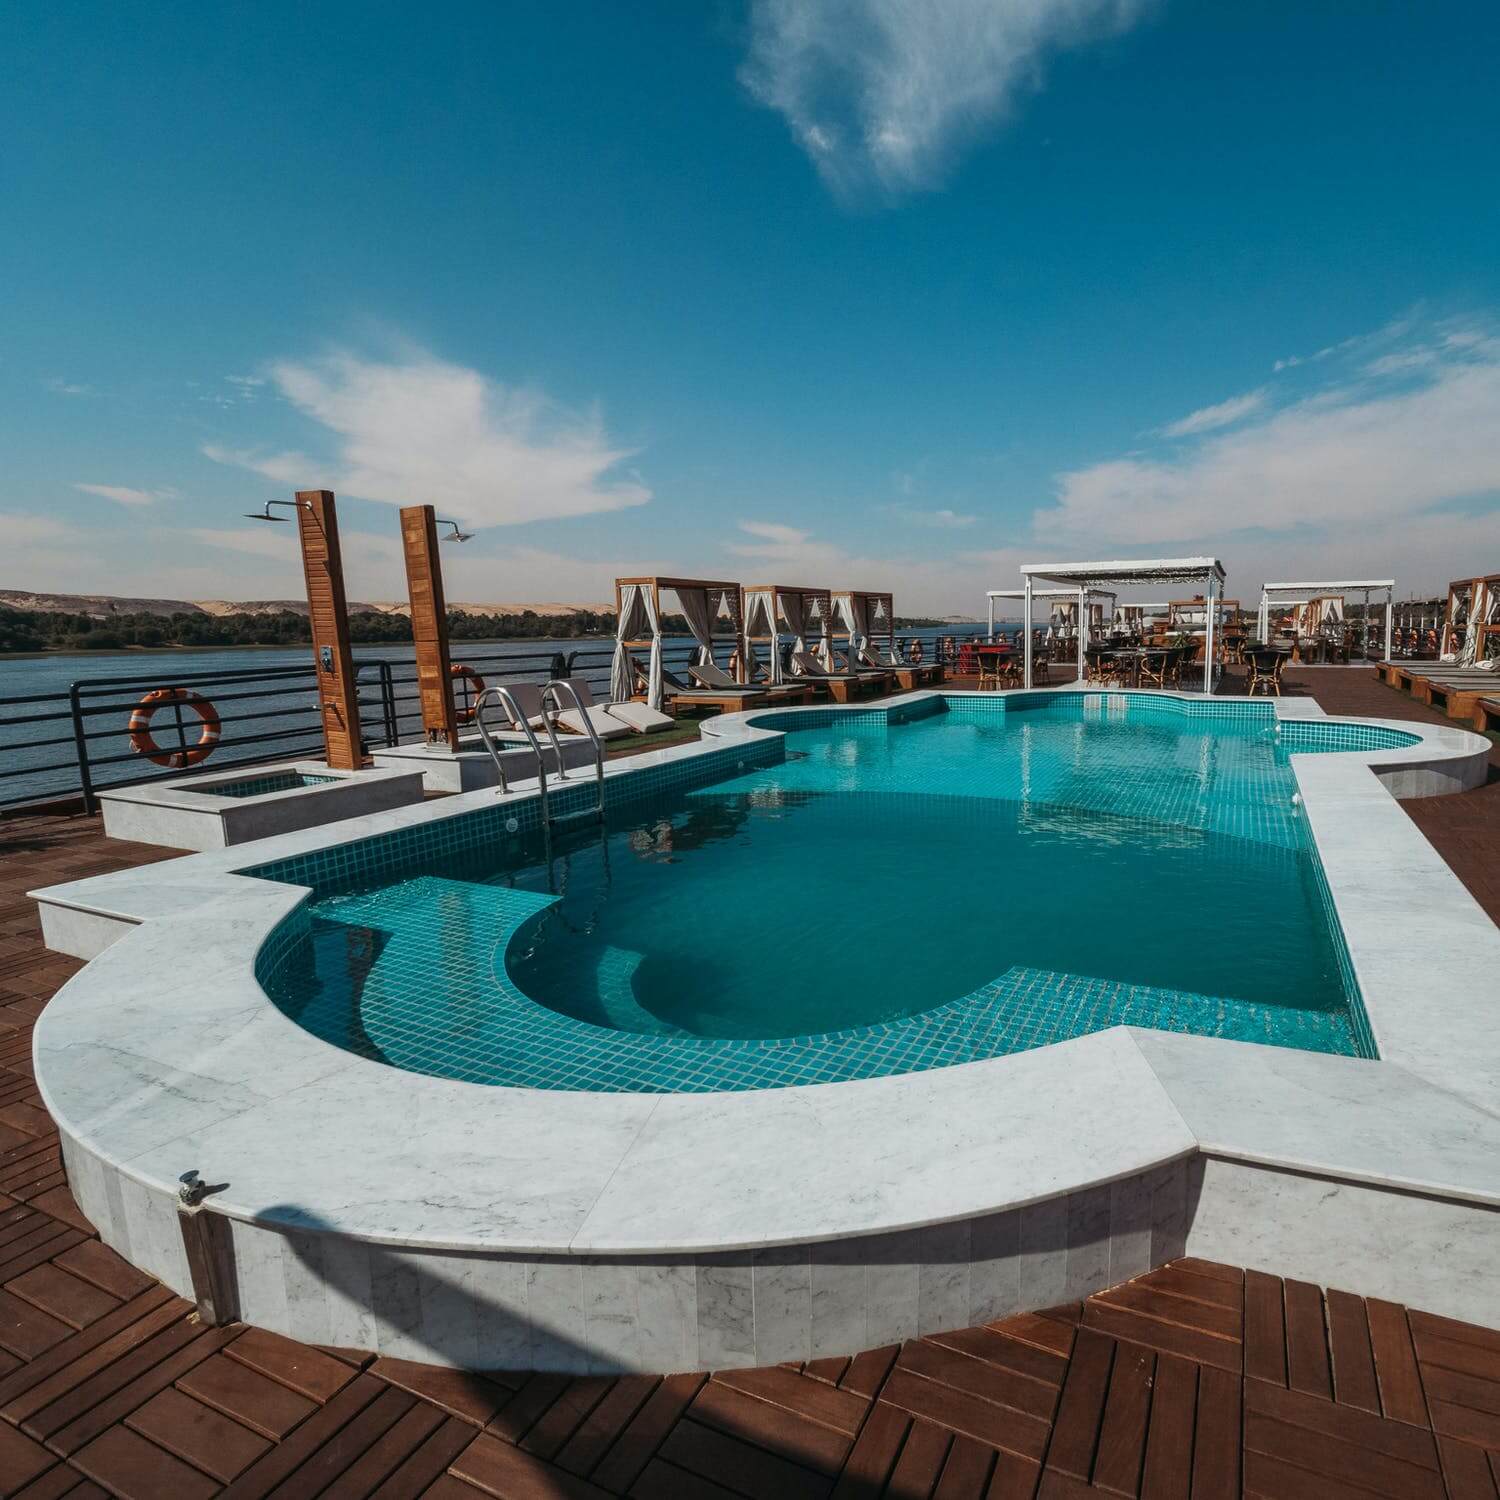 Outdoor pool on deck of a river cruise